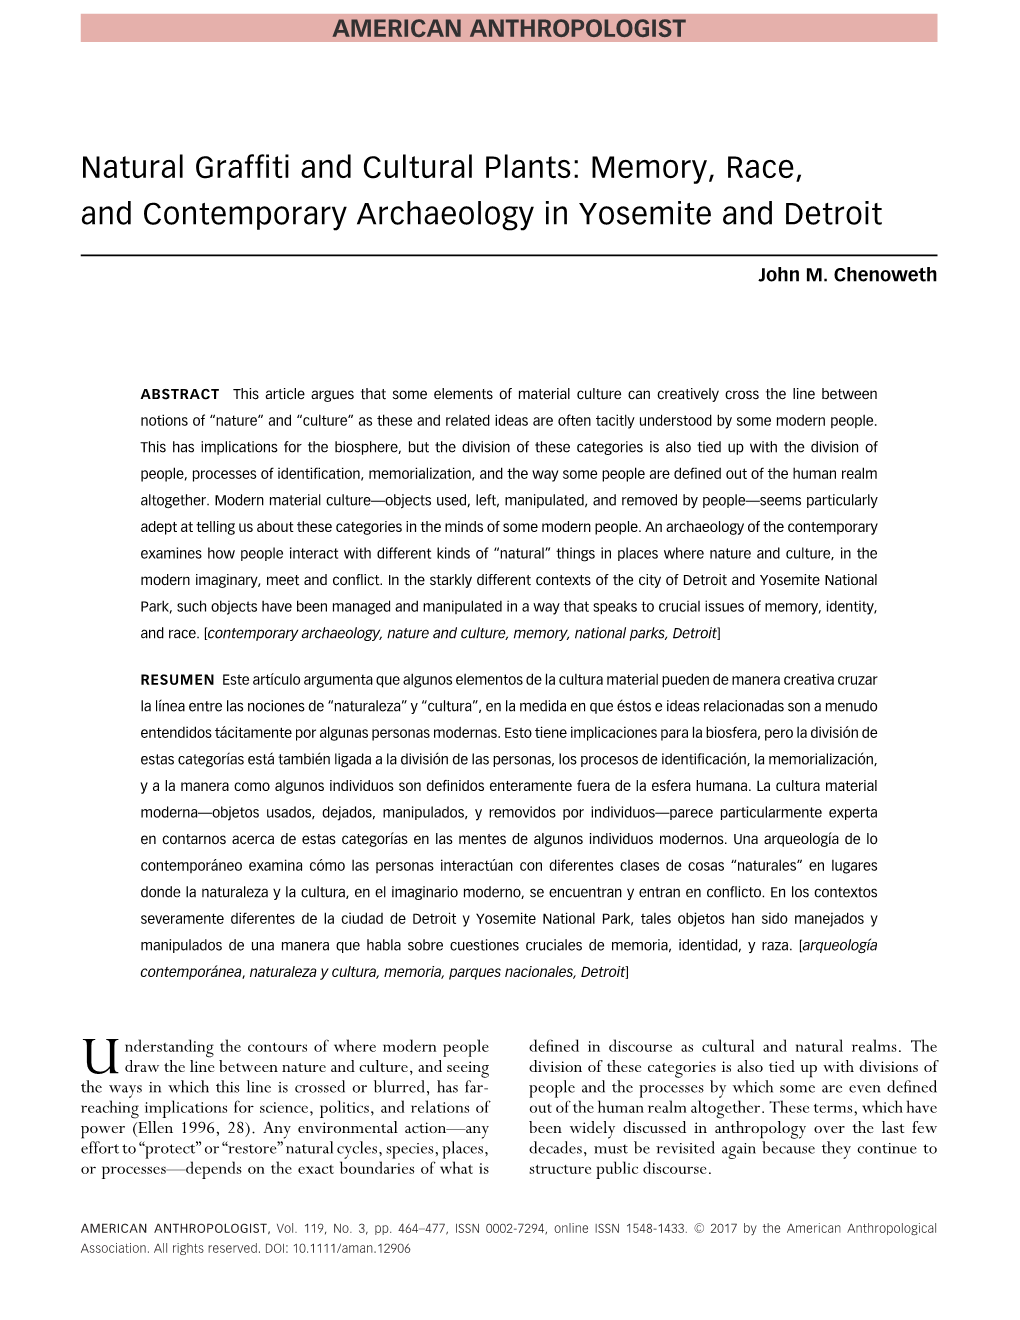 Memory, Race, and Contemporary Archaeology in Yosemite and Detroit